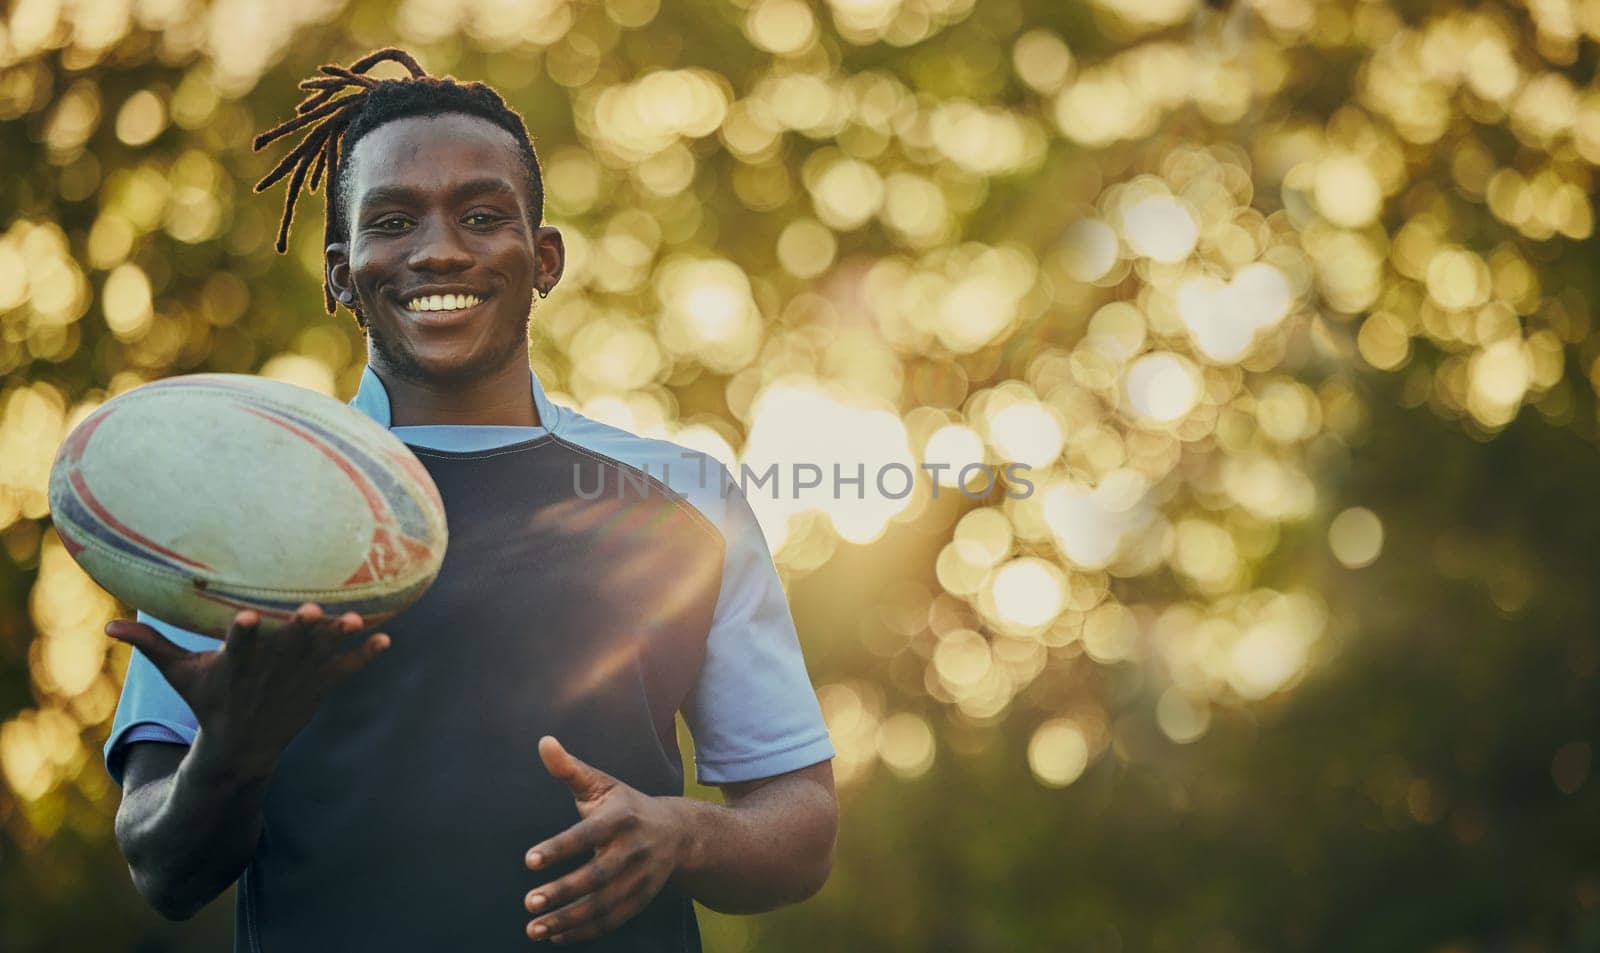 Rugby, ball and portrait of black man with smile, confidence and pride in winning game. Fitness, sports and happy face of player ready for match, workout or competition at stadium with mockup space. by YuriArcurs